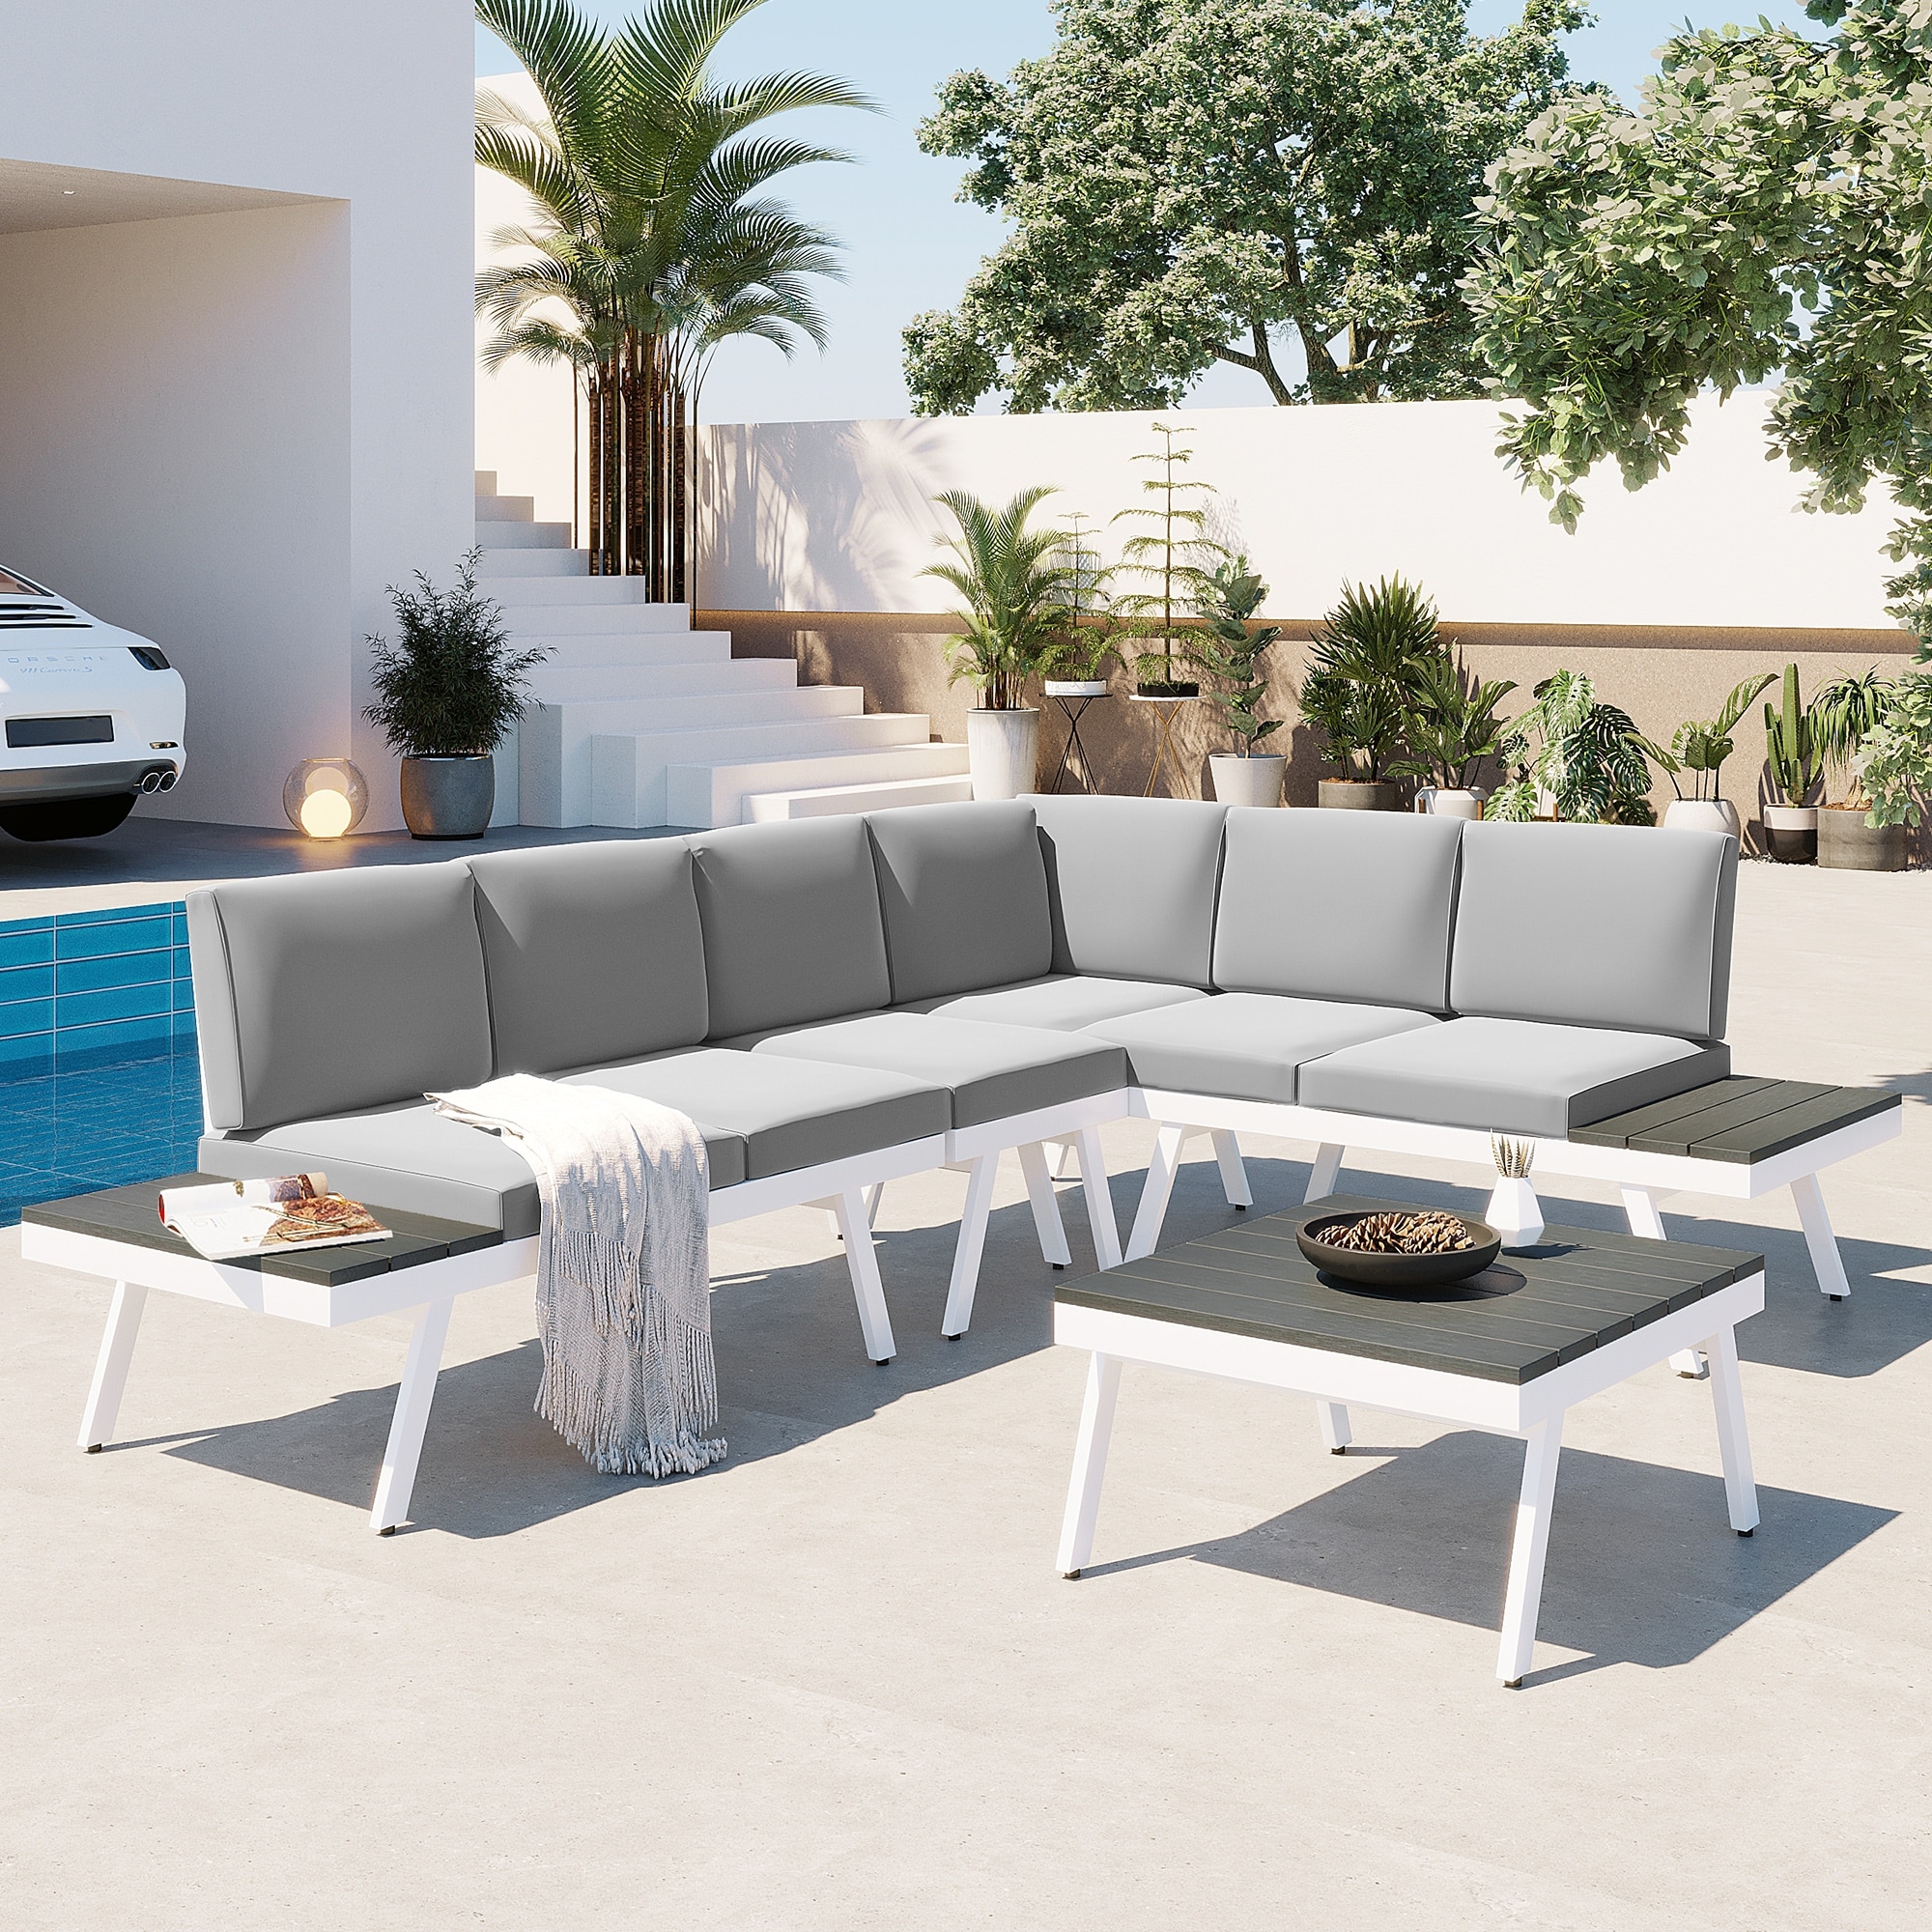 Industrial 5-piece Outdoor Patio Furniture Set  Aluminum Garden Sectional Sofa Set With Coffee Table And End Tables